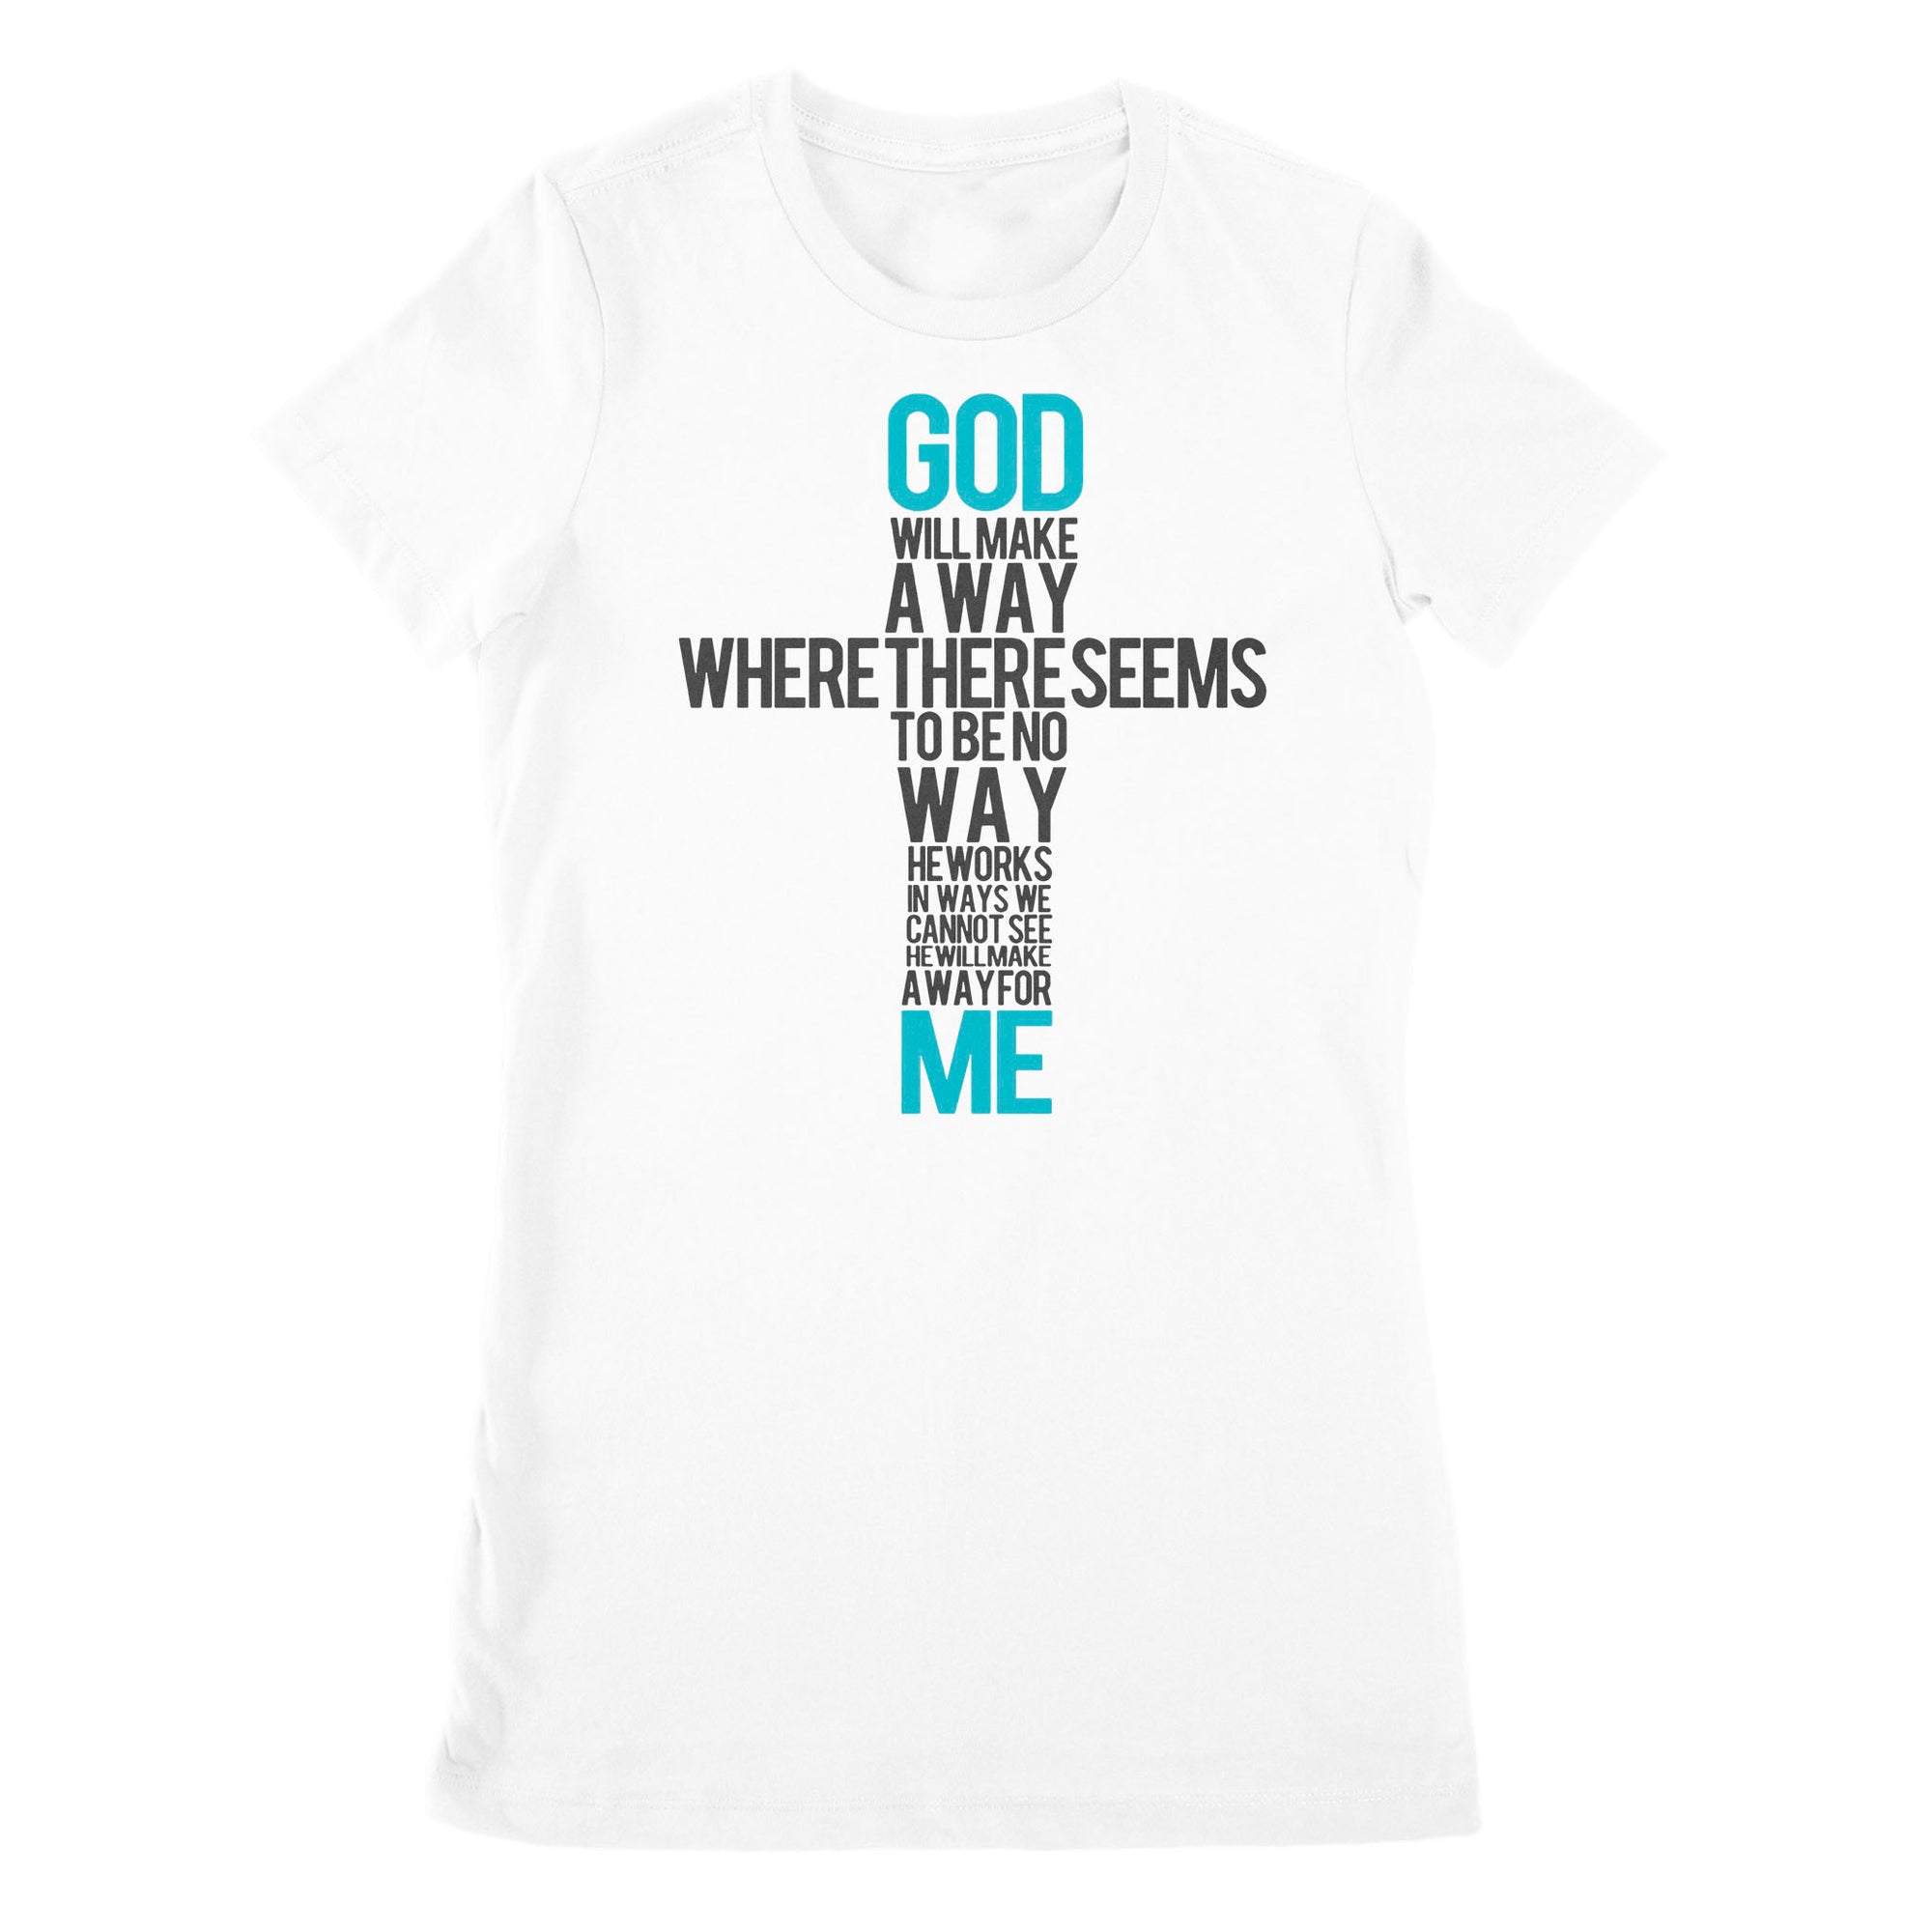 Premium Women's T-shirt - God Will Make A Way When It Seems There Is No Way